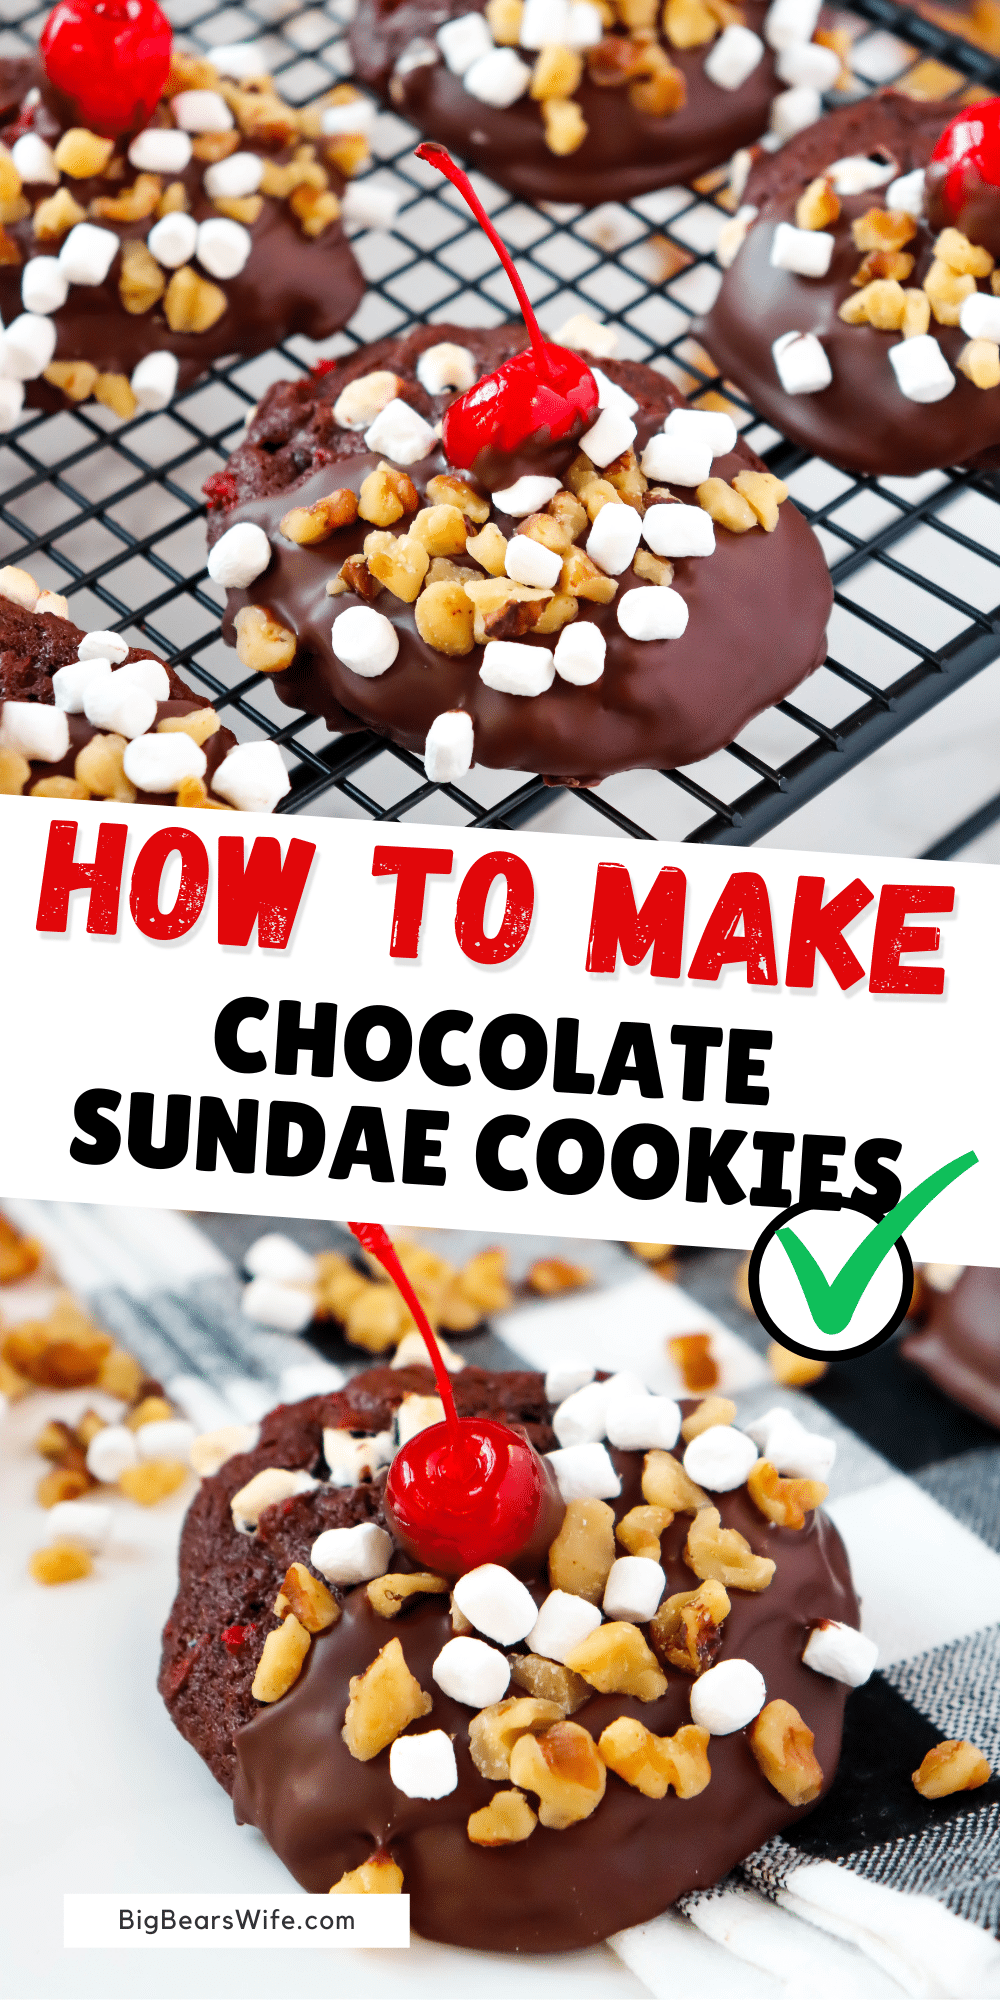 Bring the ice cream parlor home with these fun Chocolate Sundae Cookies! Homemade Chocolate cookies with cherries are topped with melted chocolate, marshmallows, walnuts and a cherry!  via @bigbearswife